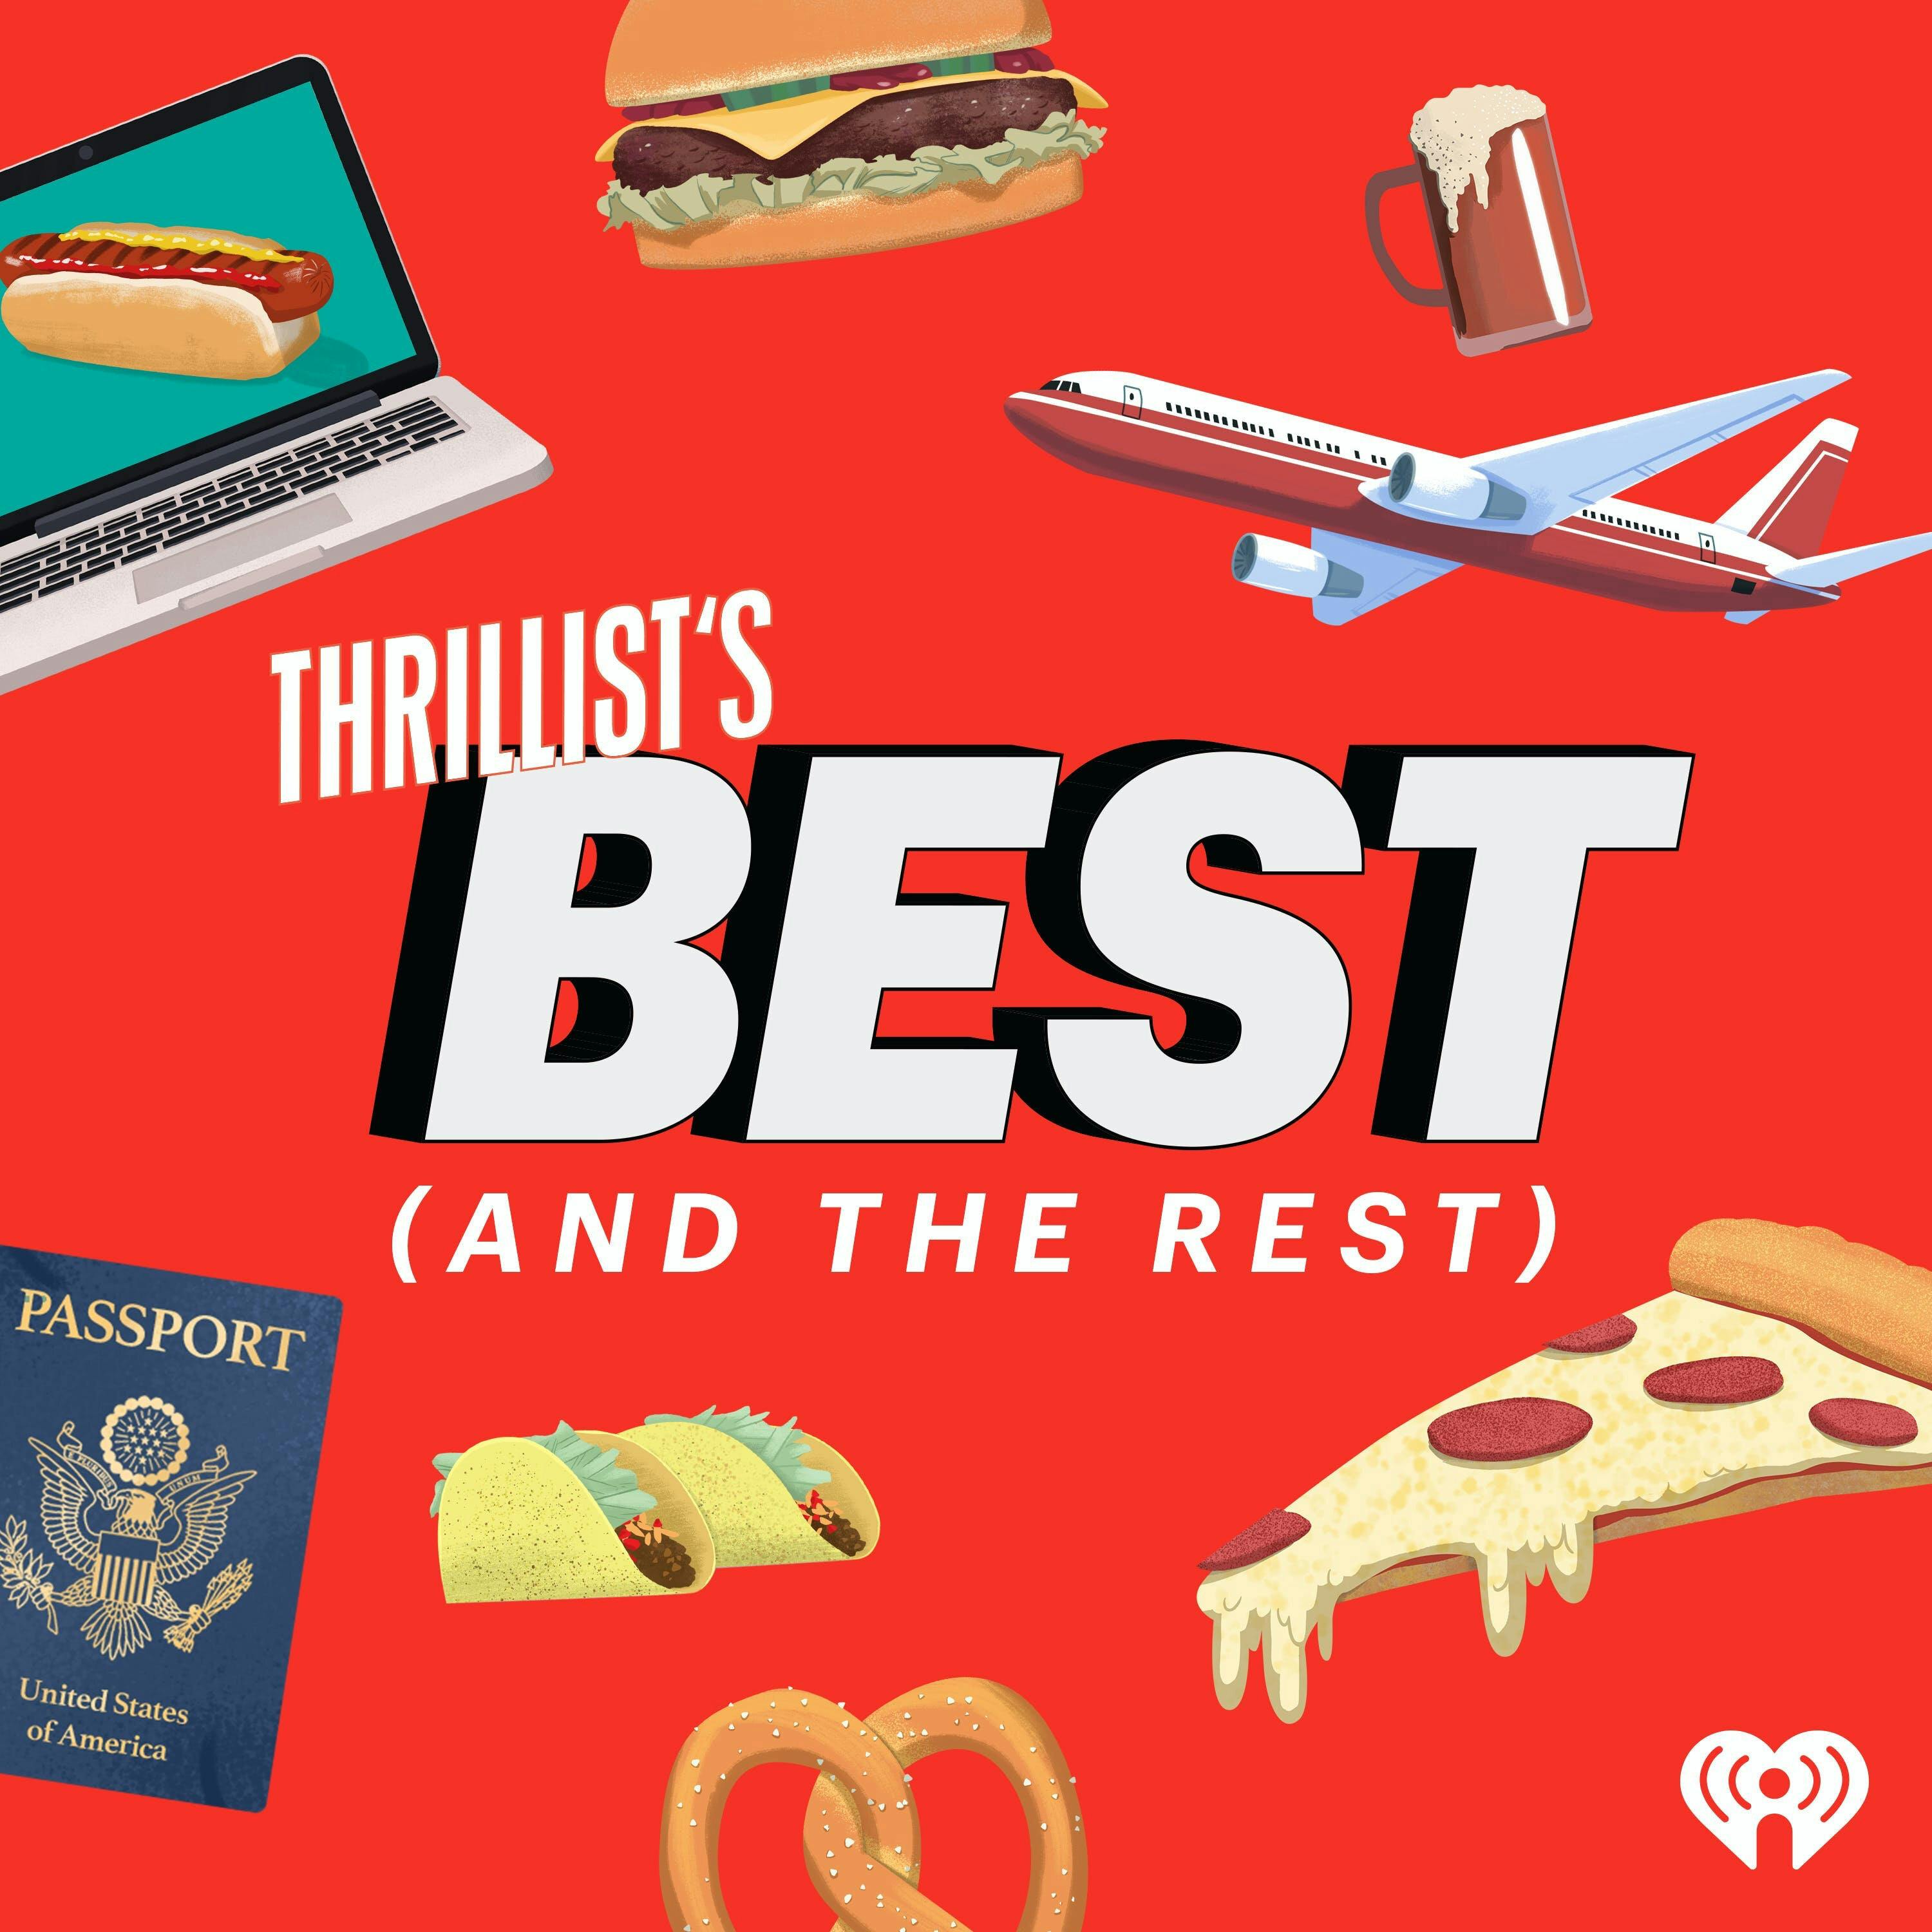 THRILLIST'S BEST: The Definitive Best Order at McDonald's, In-n-Out, and More